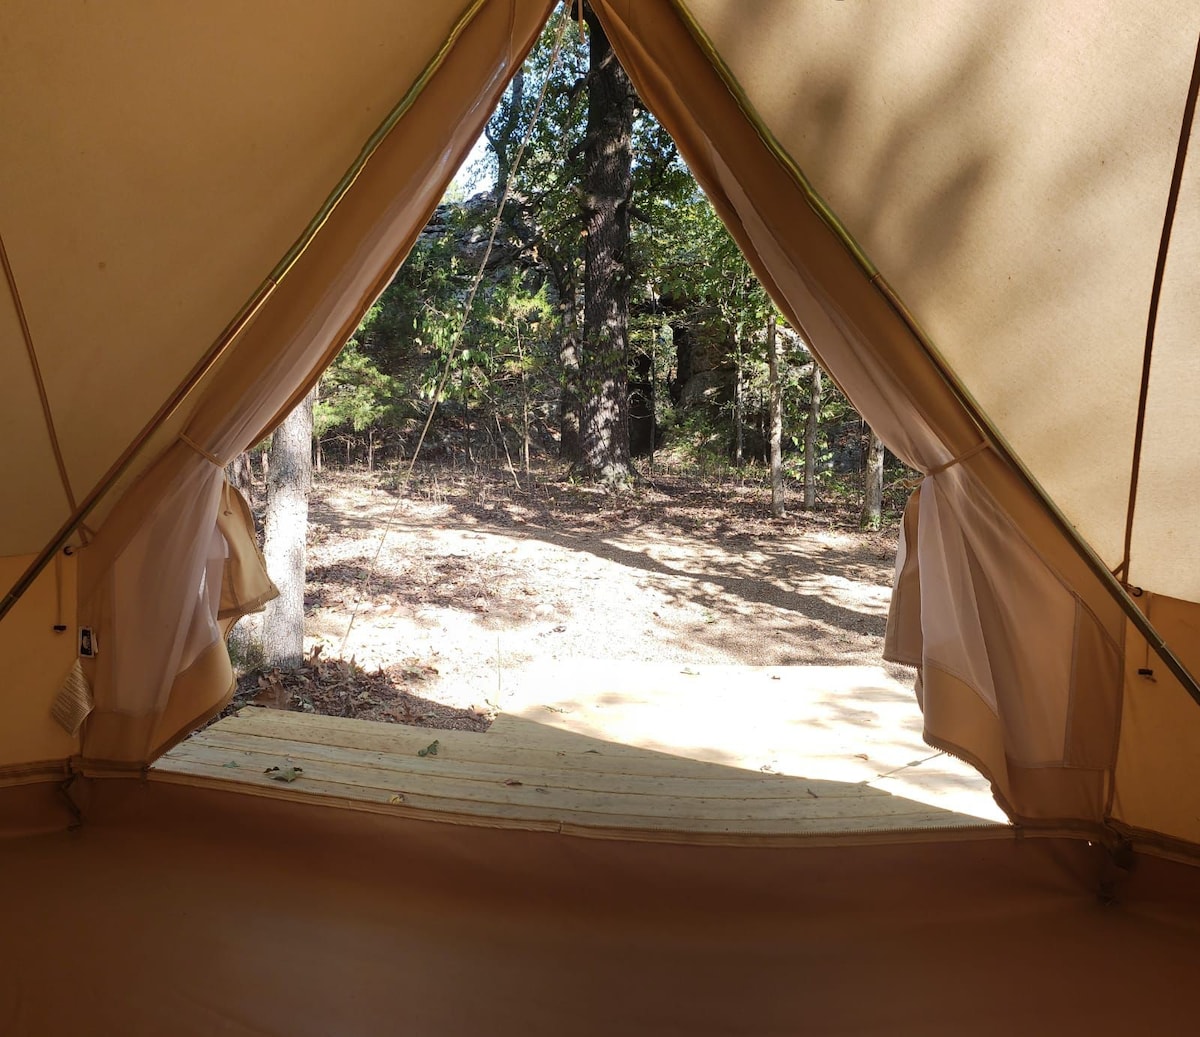 Bell tent in nature - 2 singles